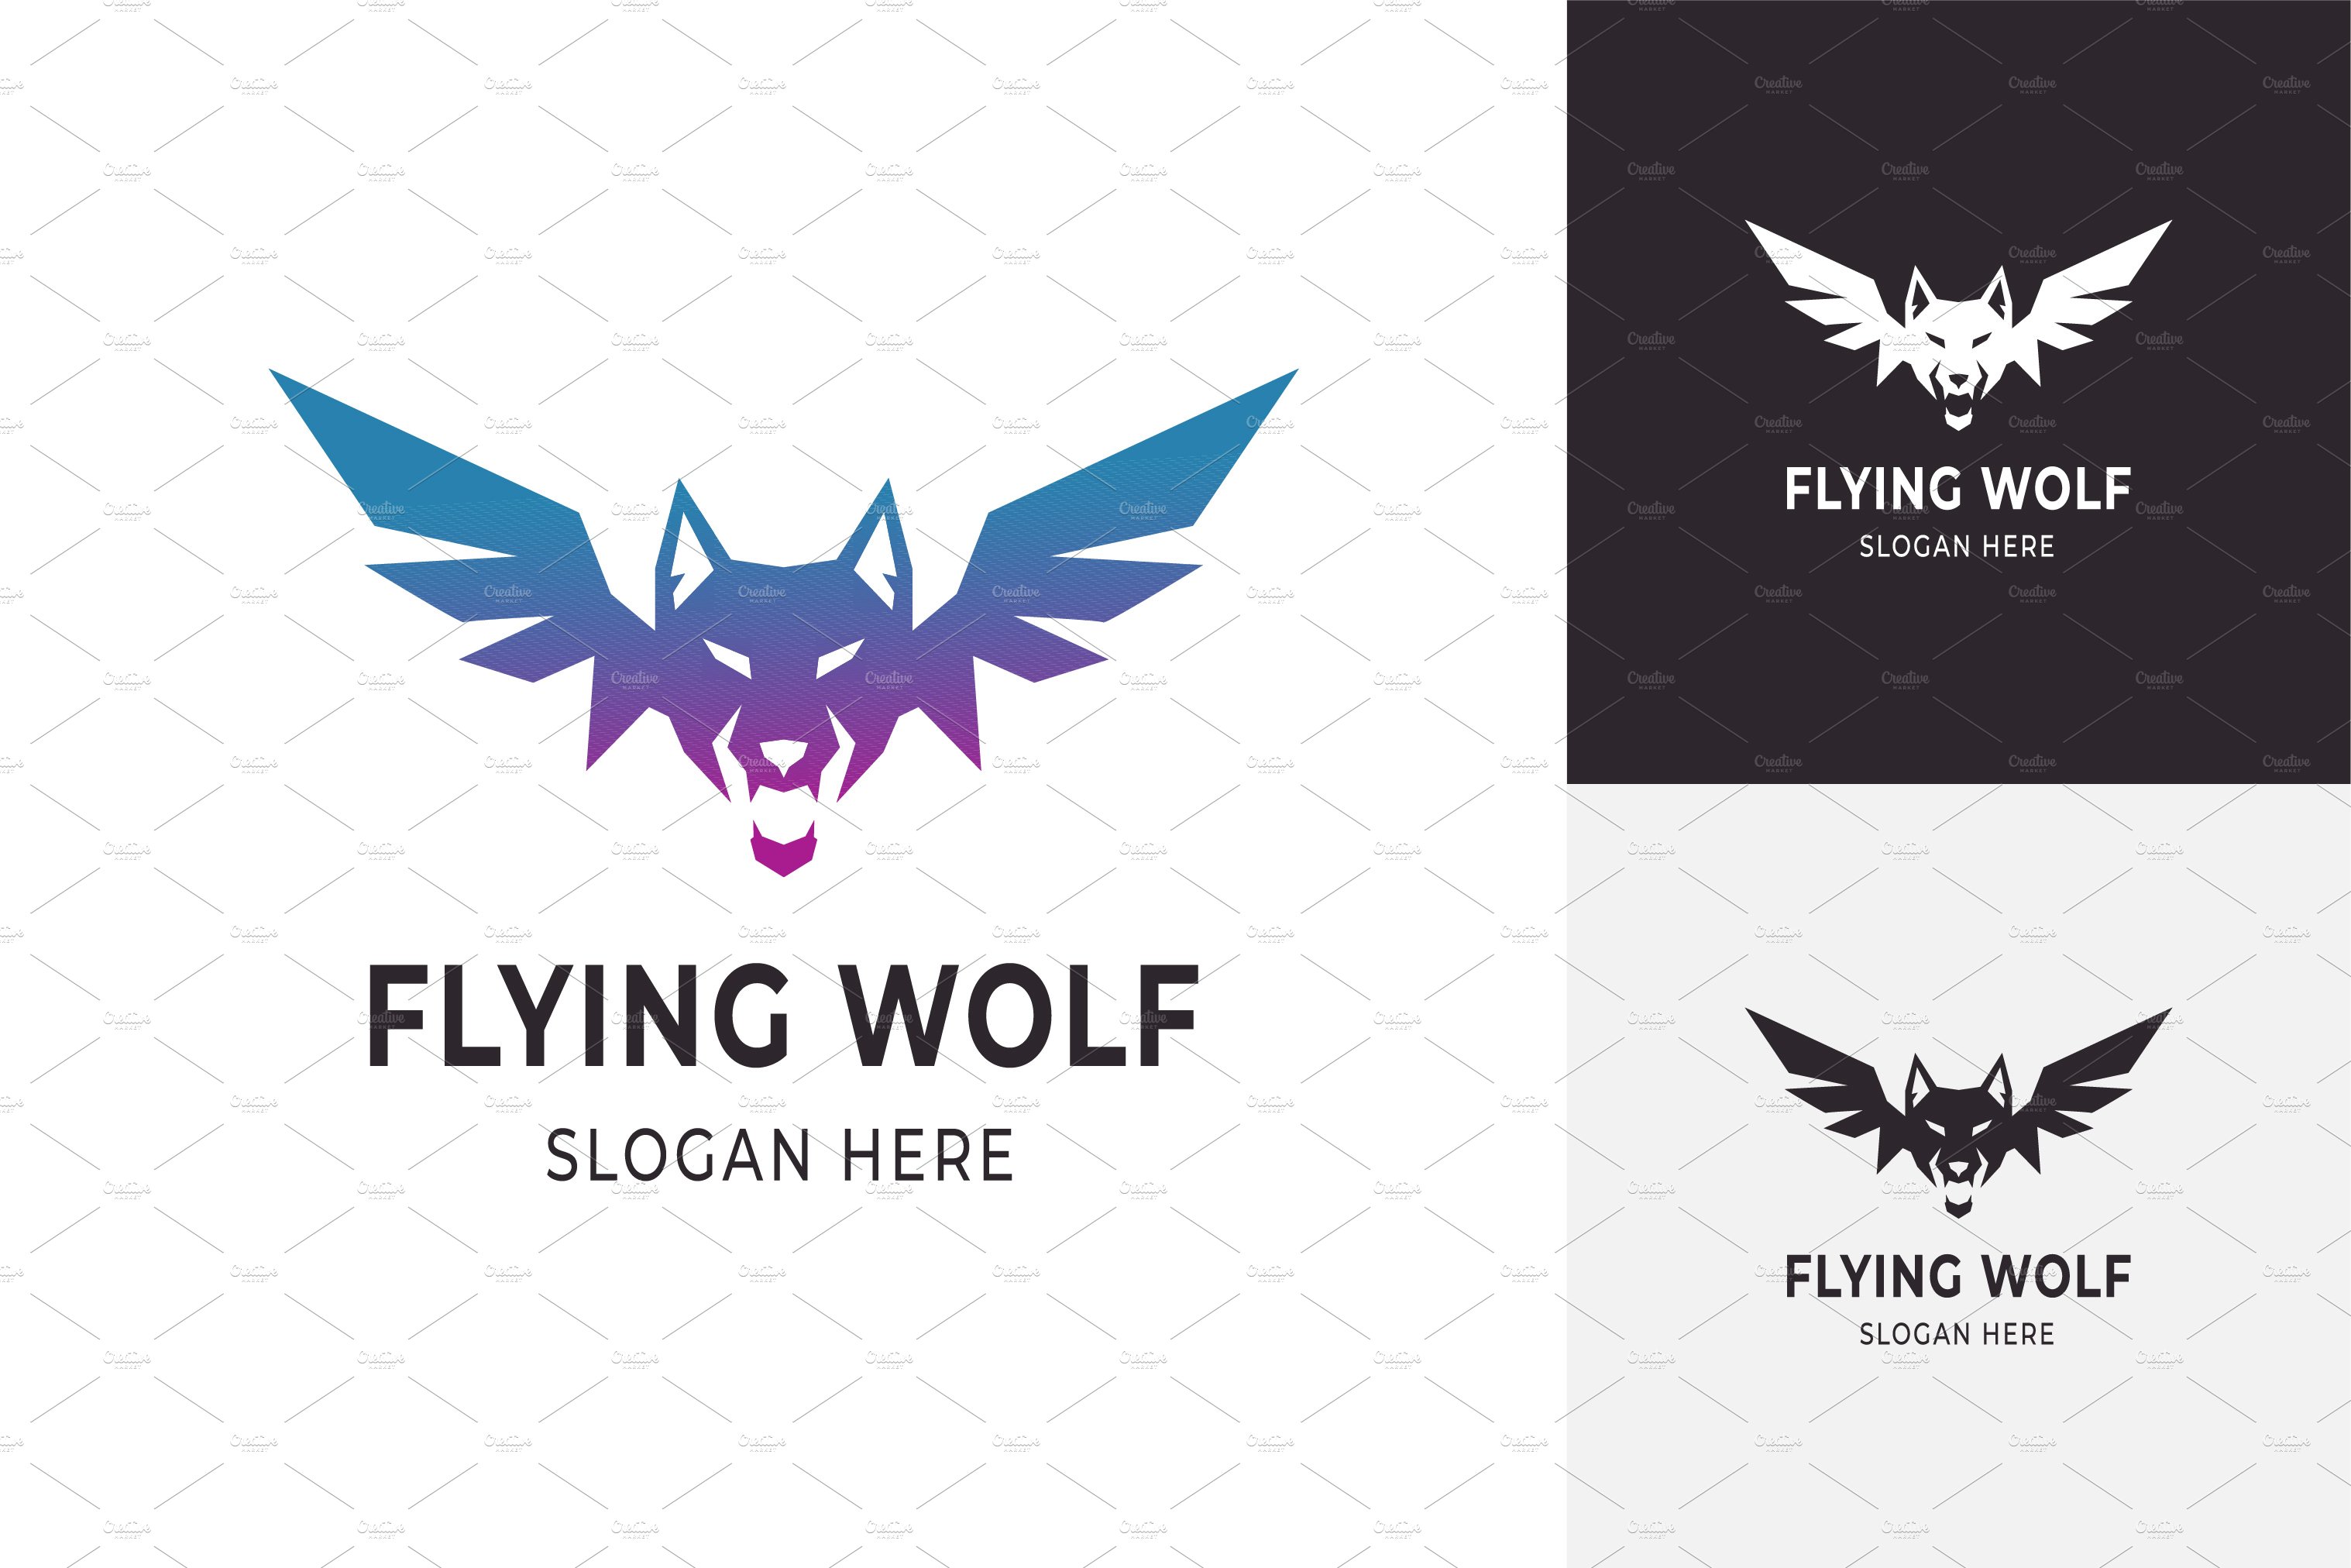 Flying wolf logo cover image.